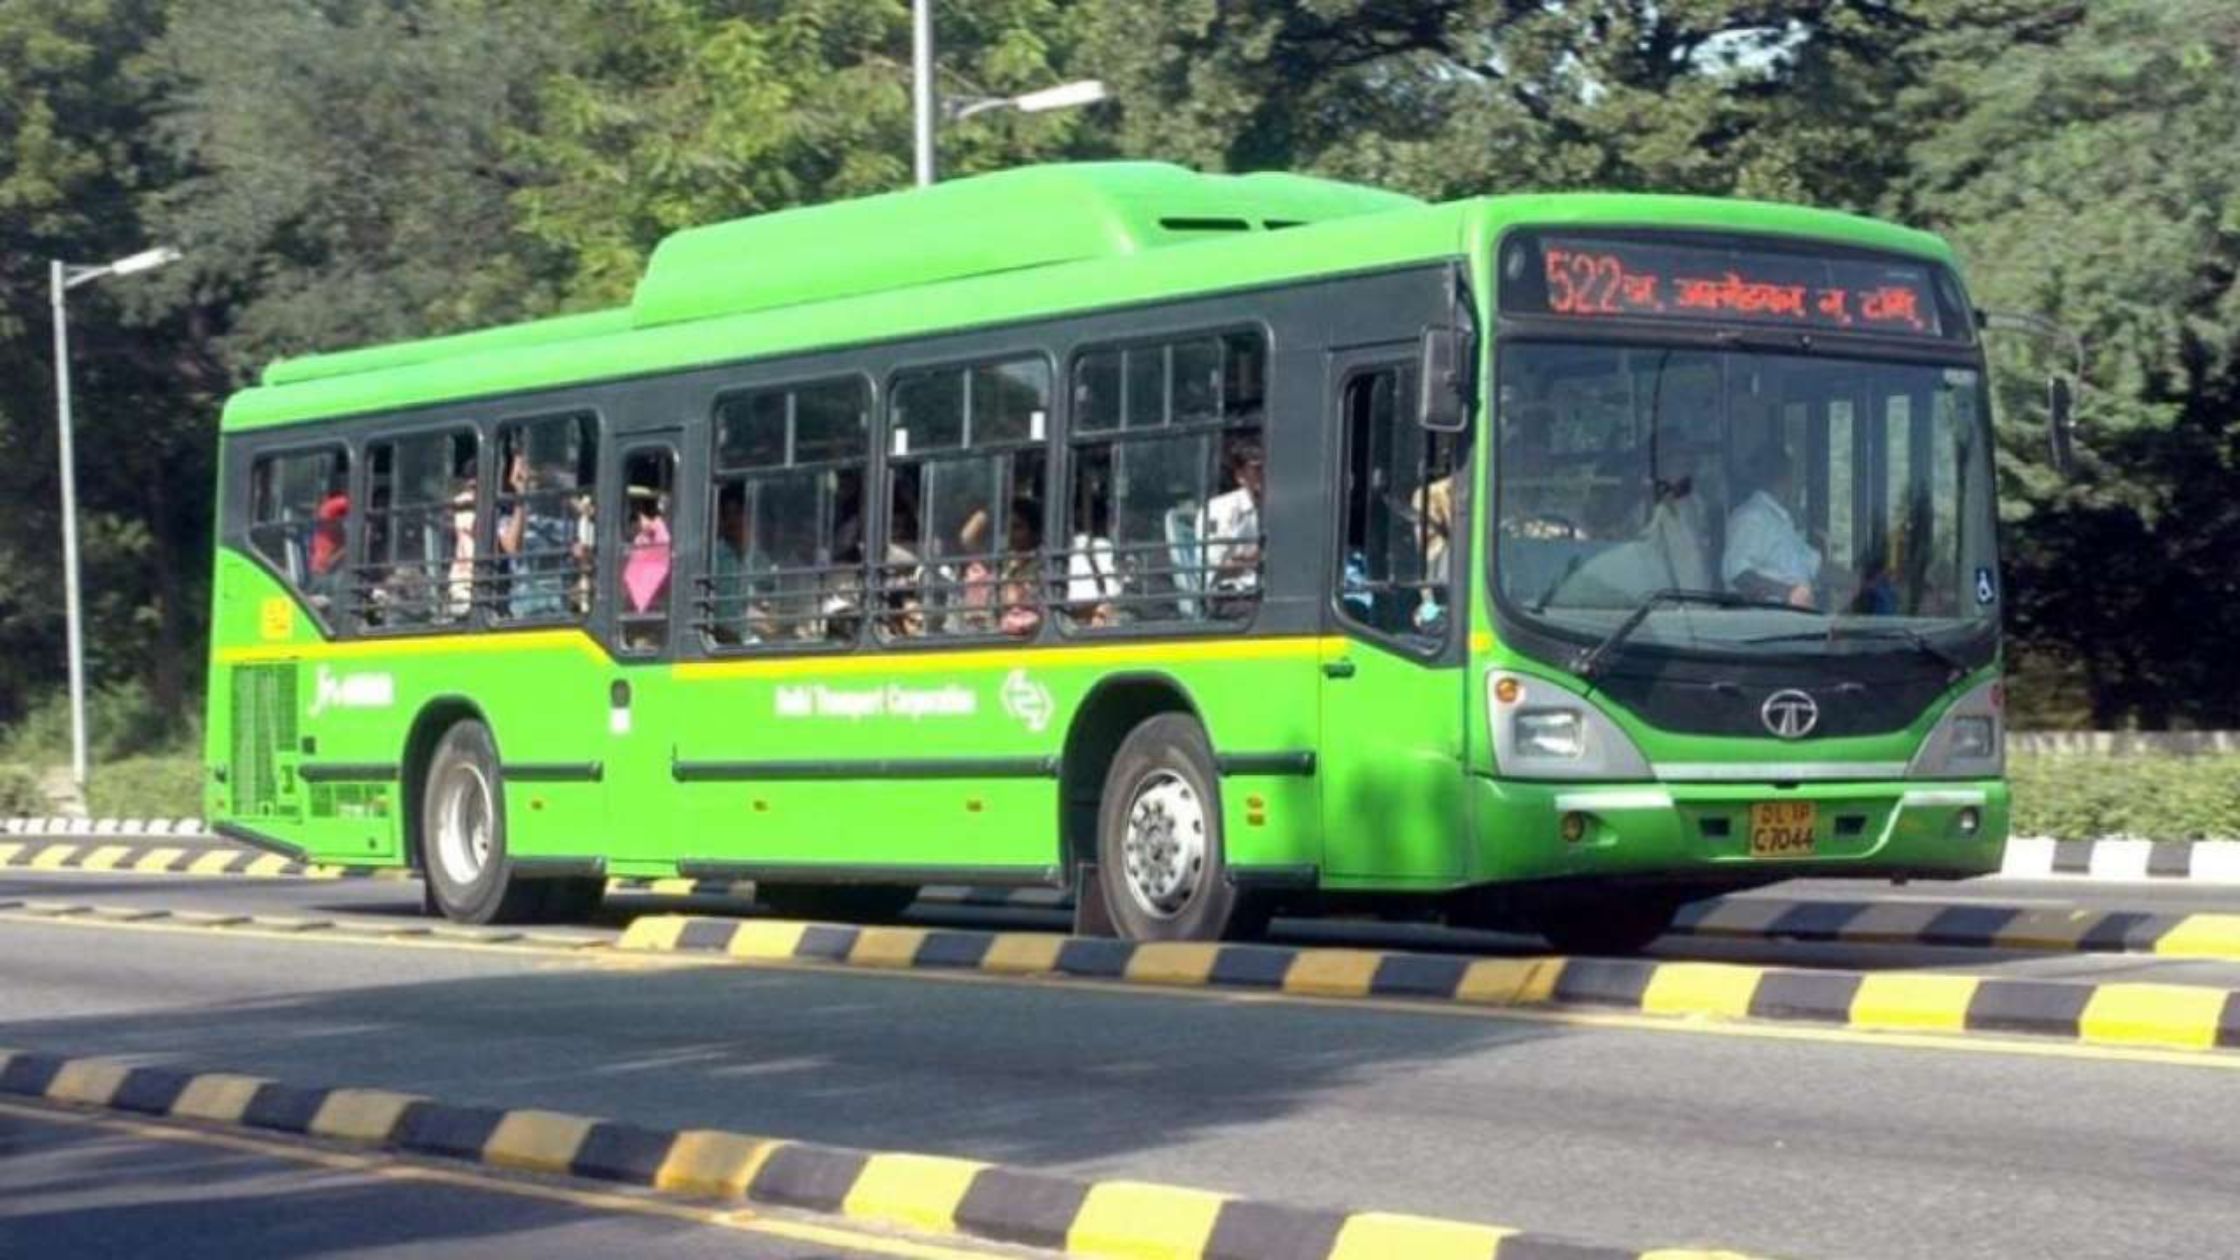 75 new CNG buses will run on these five routes including the capital of Bihar